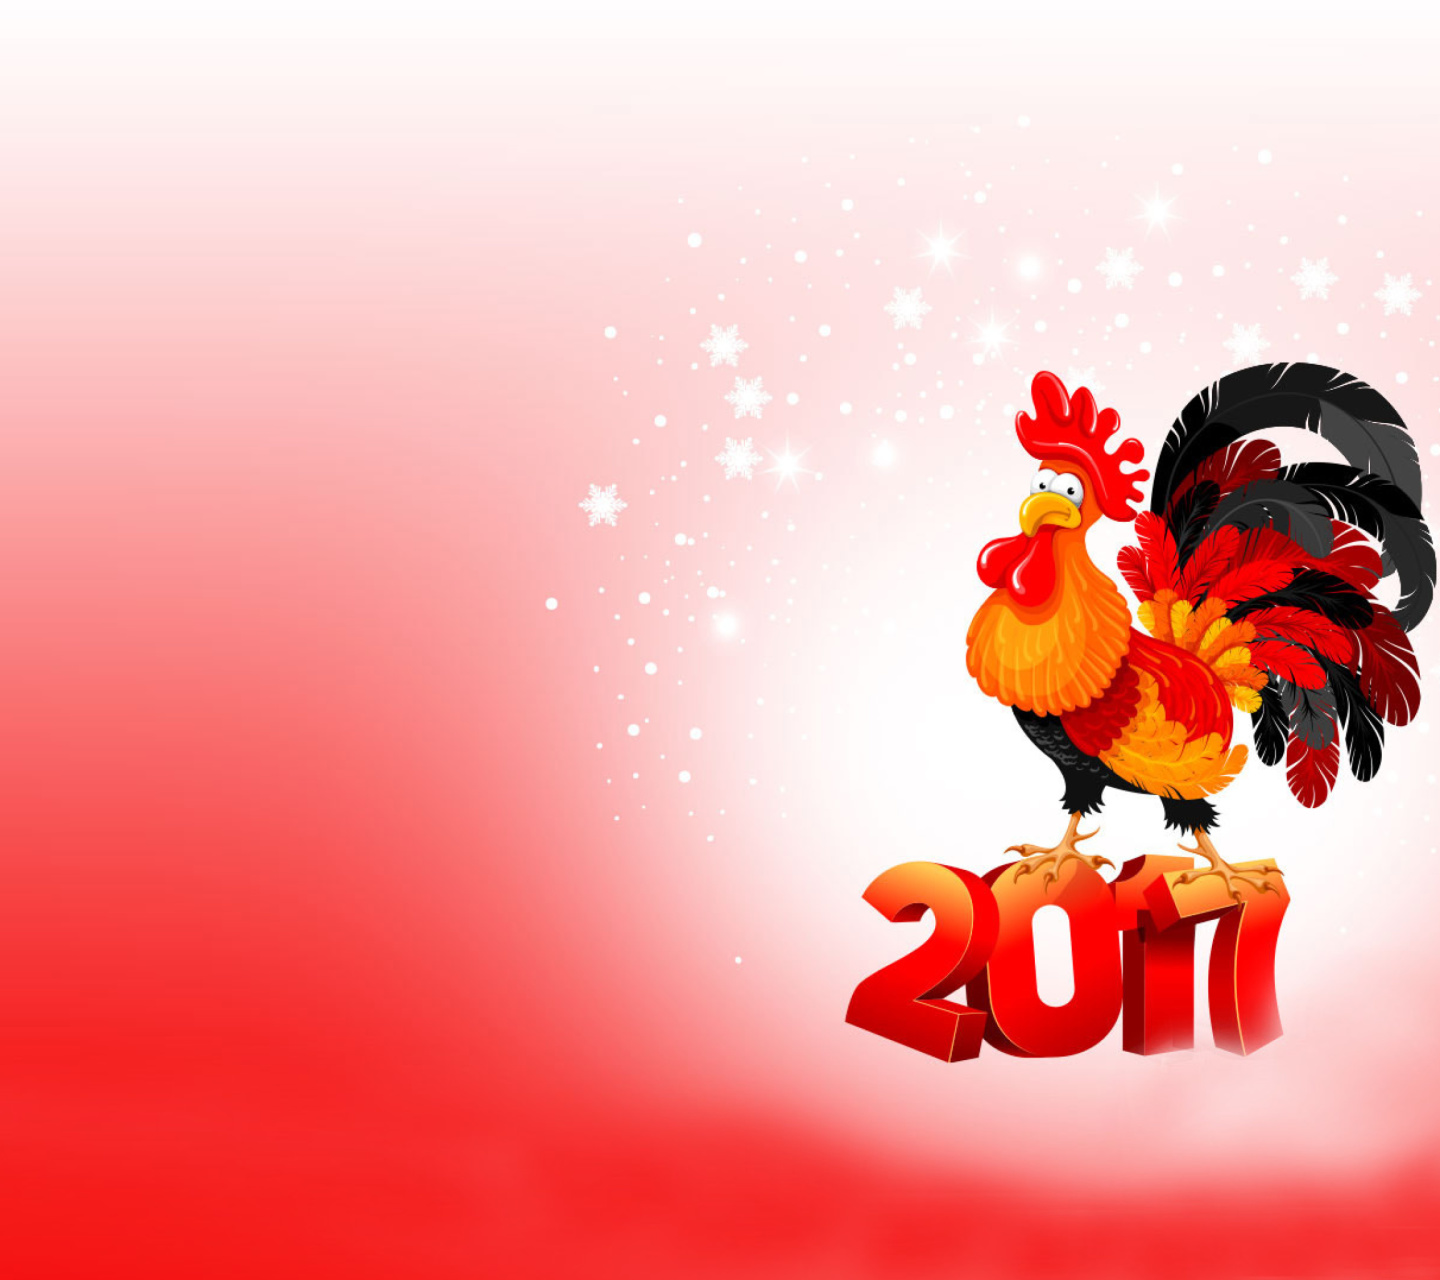 2017 New Year of Cock wallpaper 1440x1280